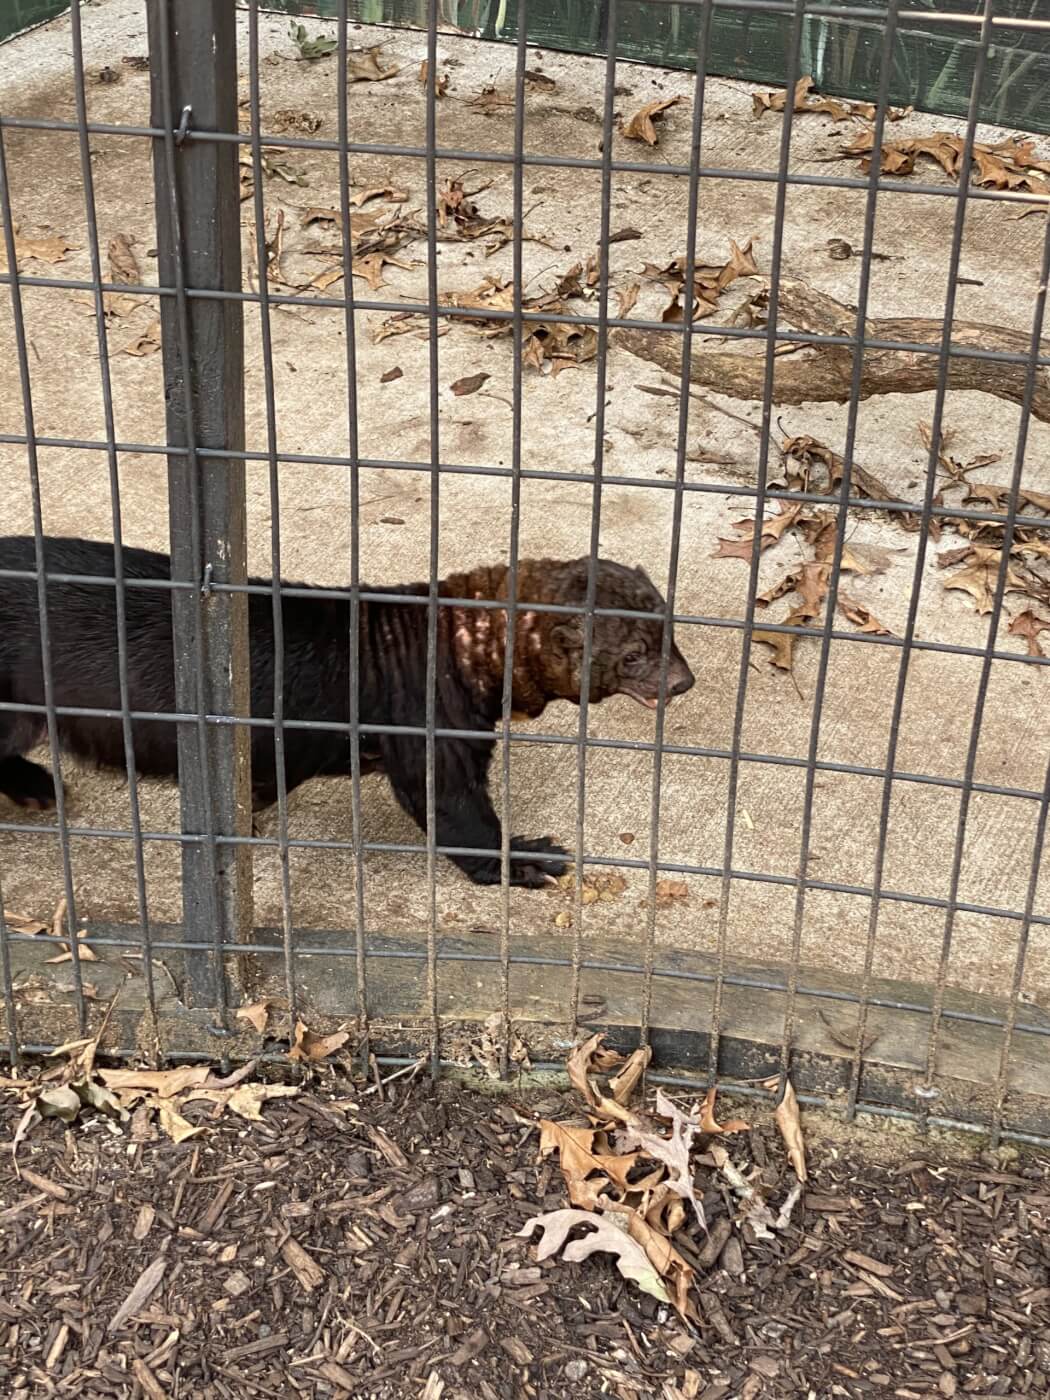 A Tayra behind a wire fence on a hard concrete floor, their neck has hair loss.